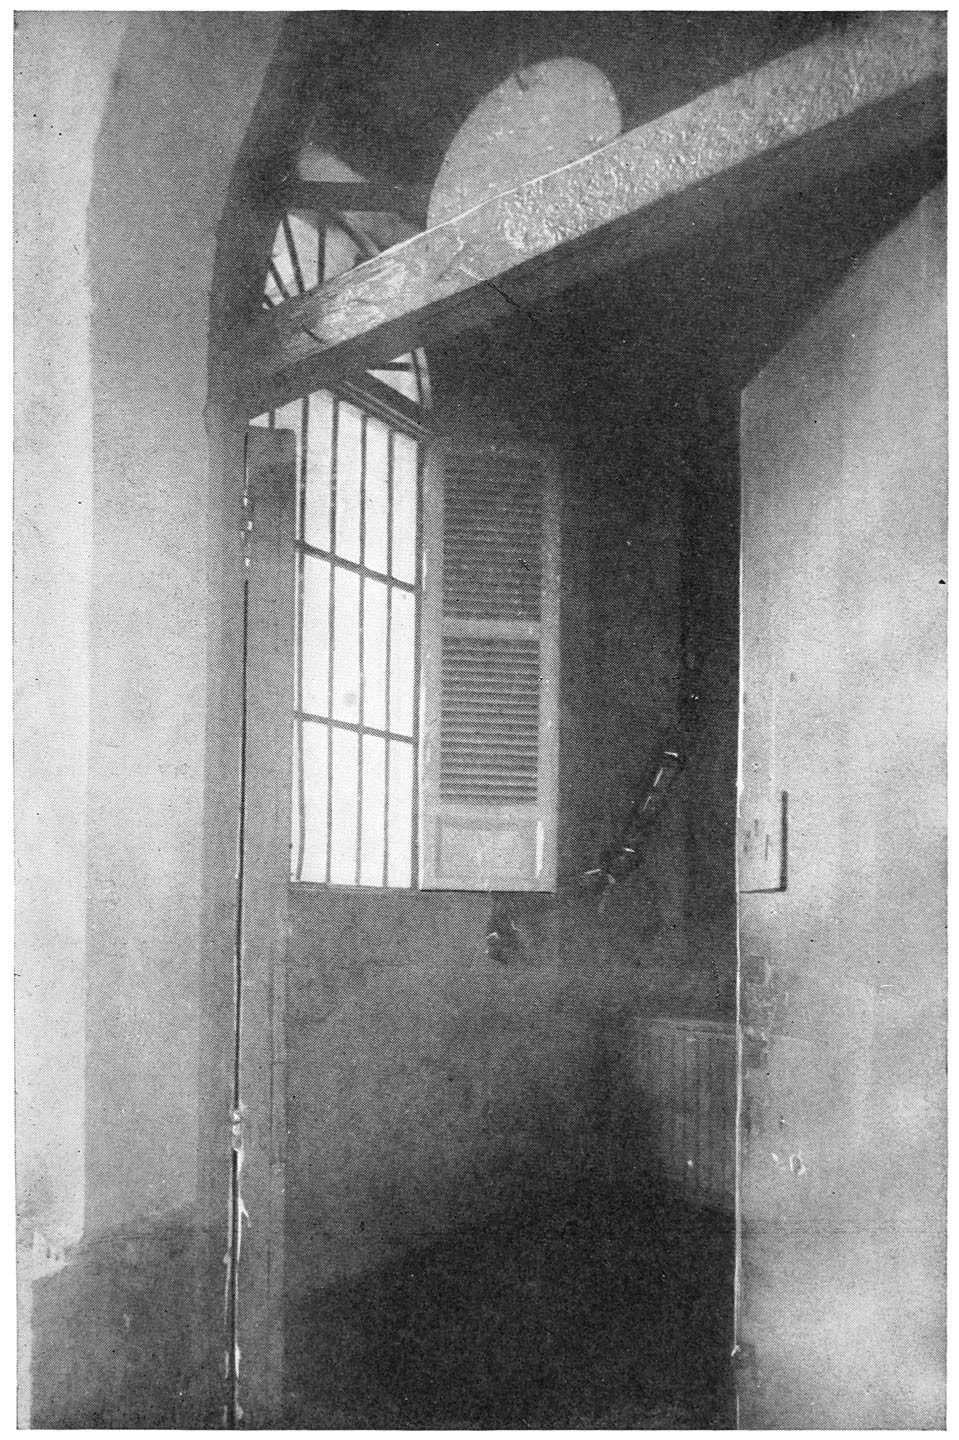 RIZAL’S CELL AT FORT SANTIAGO